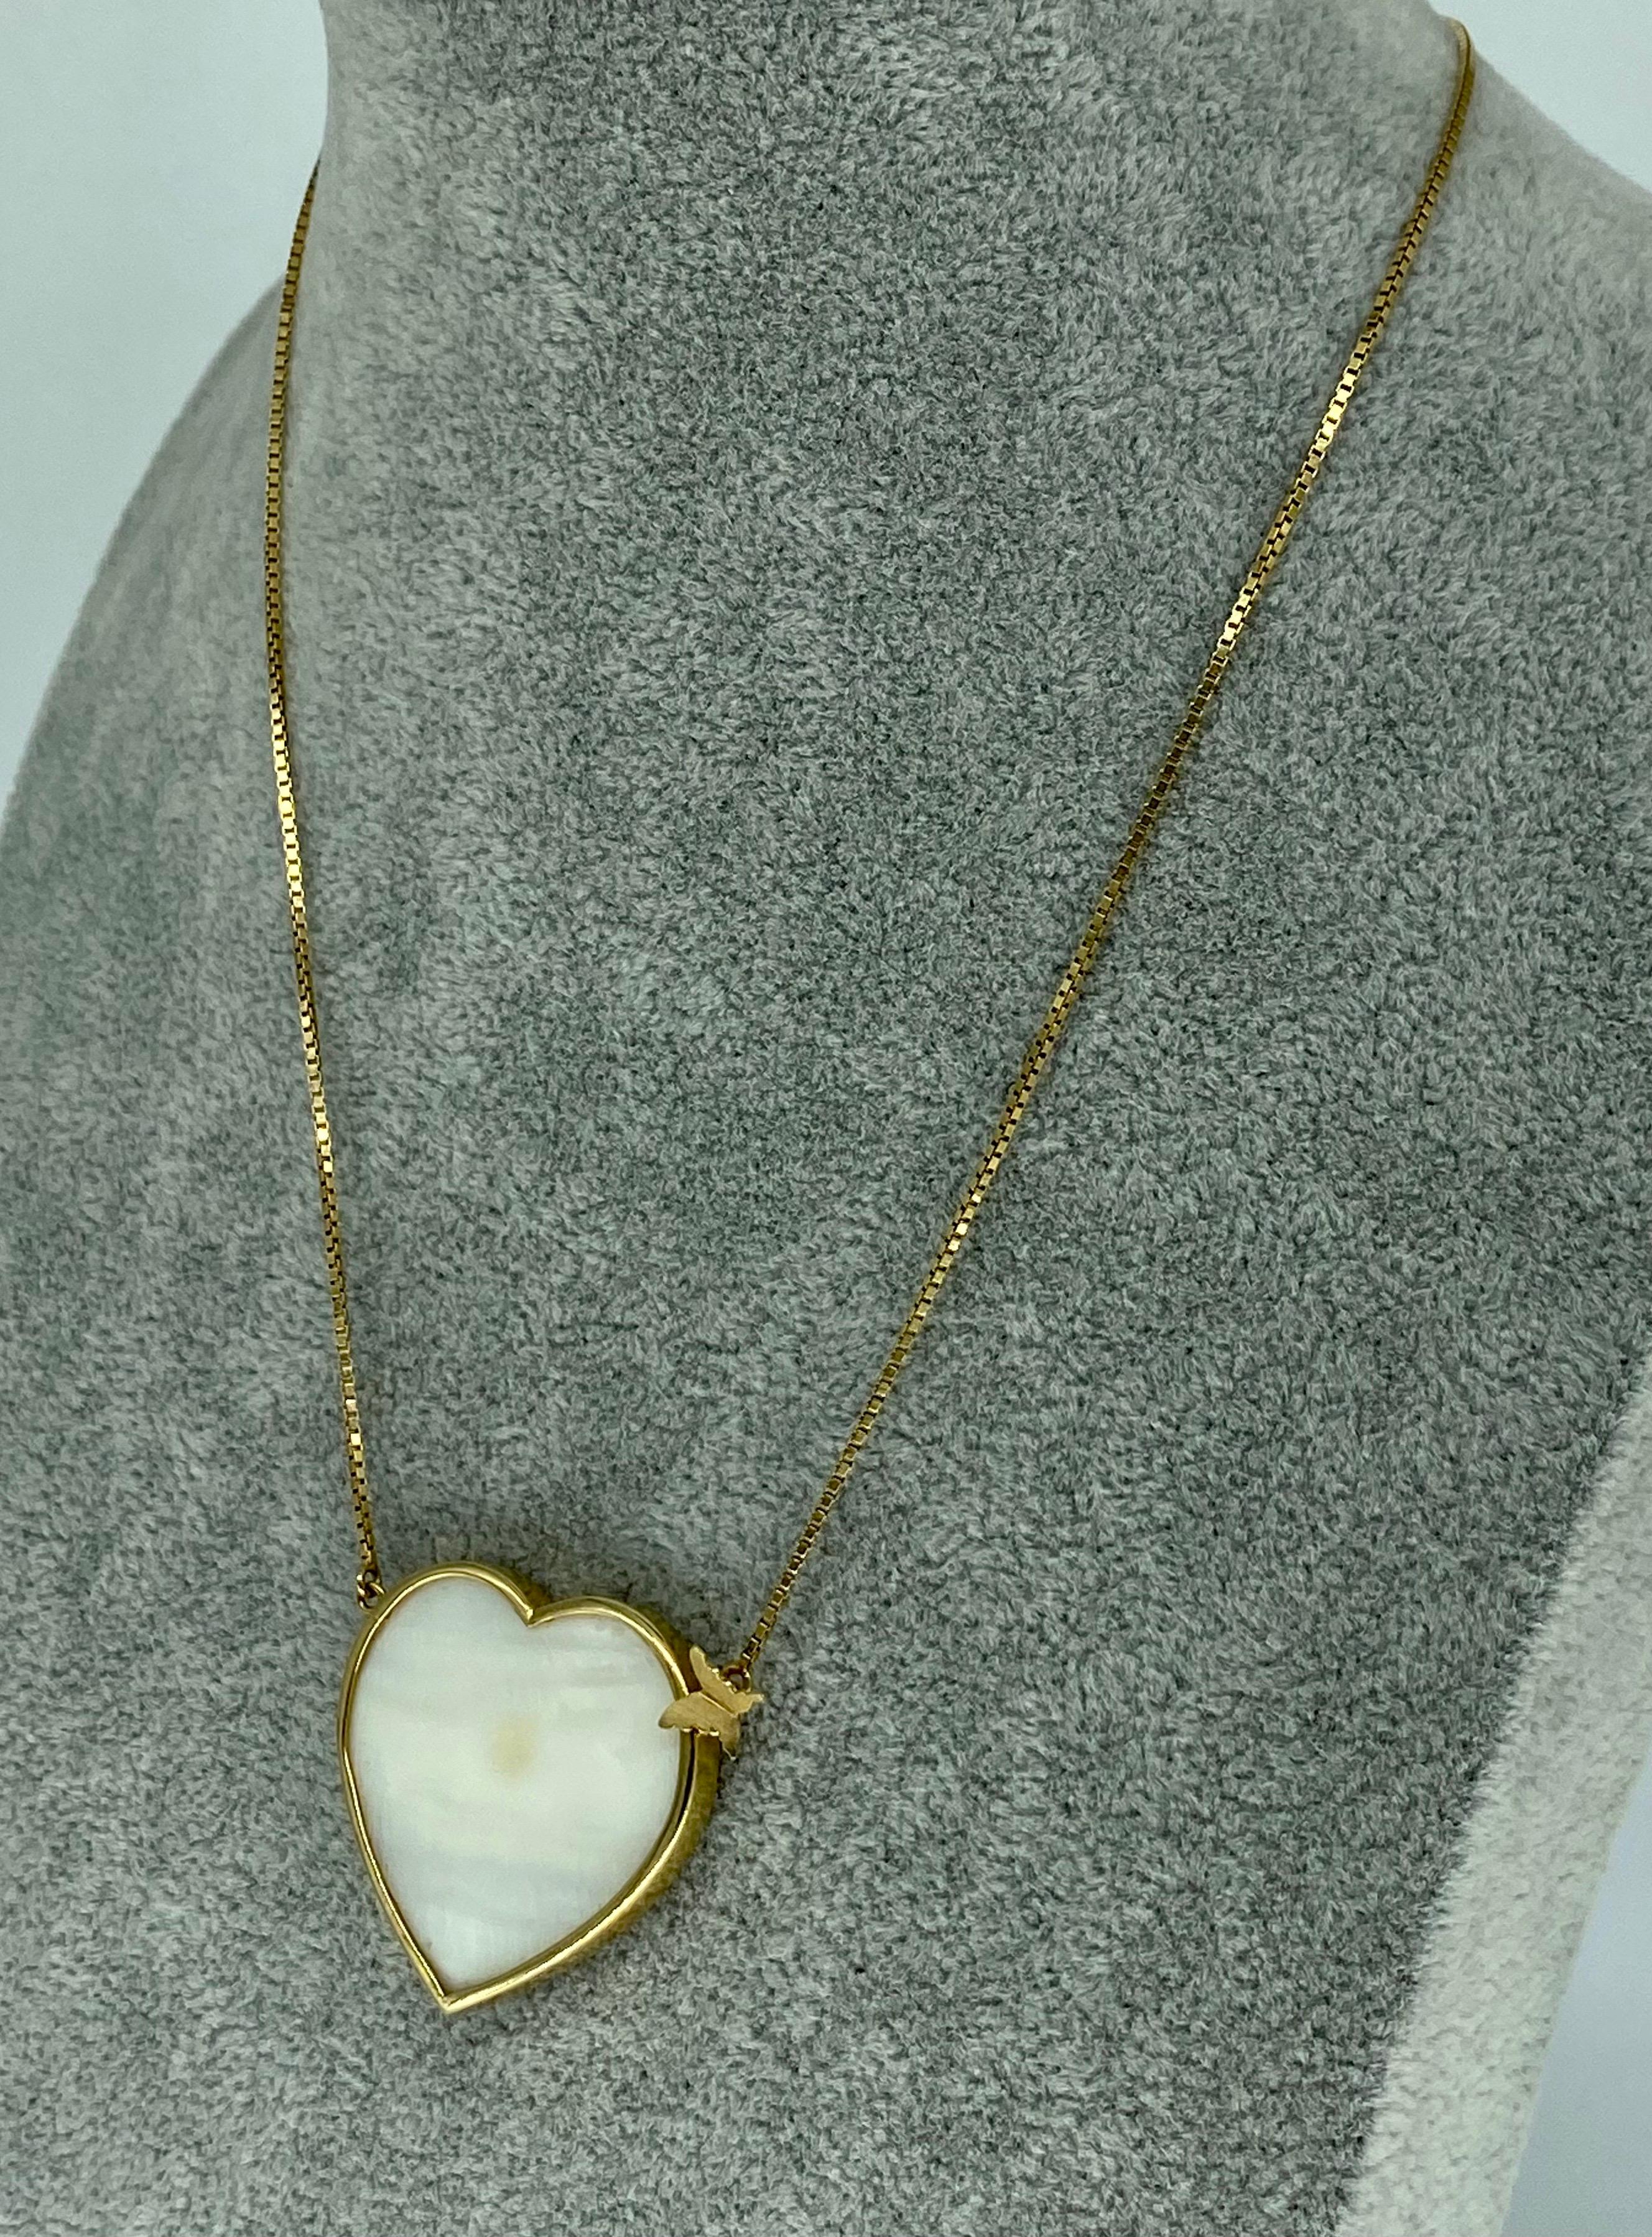 Designer Patricia Jias 2’x2’ Big Pearl Heart Butterfly Bow Tie Necklace. Famous designer from Brazil is back again with another outstanding necklace piece. The necklace features a big pearl heart cut stone measuring 2 inch by 2 inch. The necklace